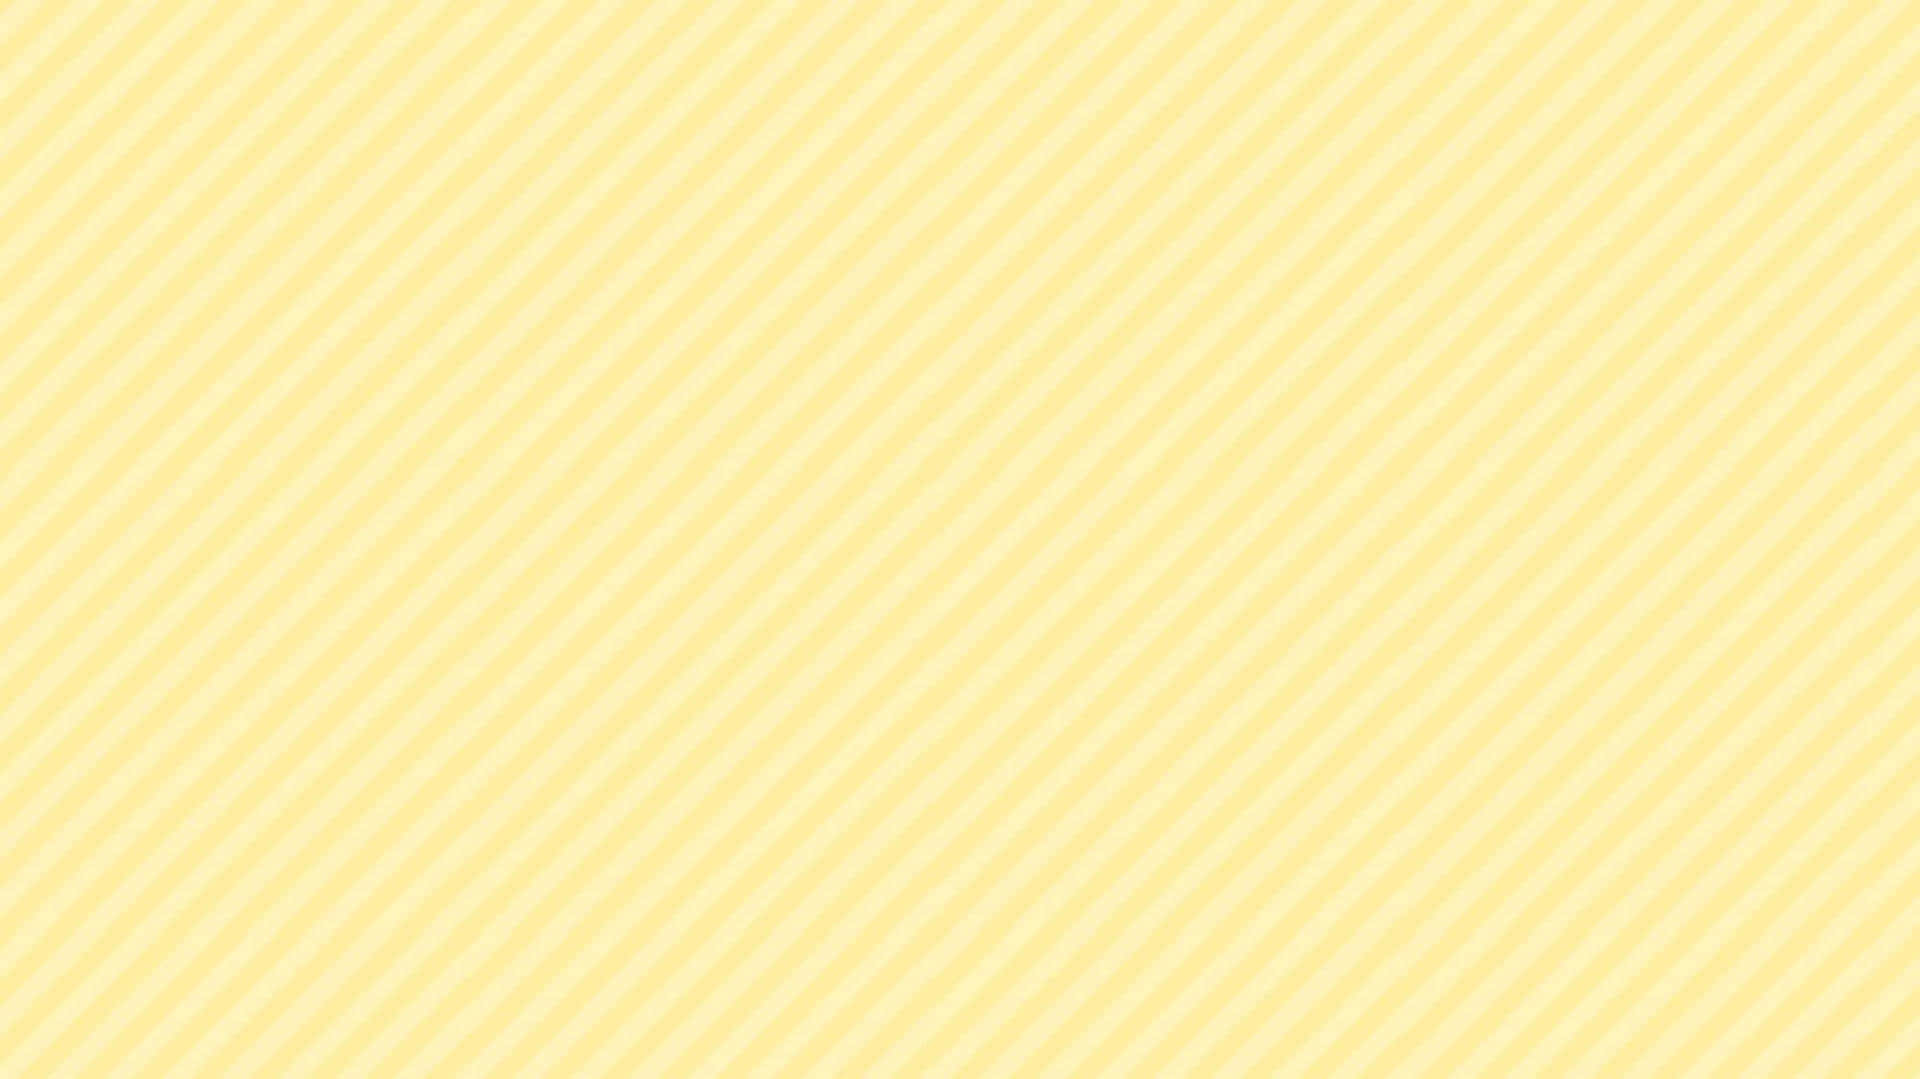 A Yellow And White Striped Background Wallpaper